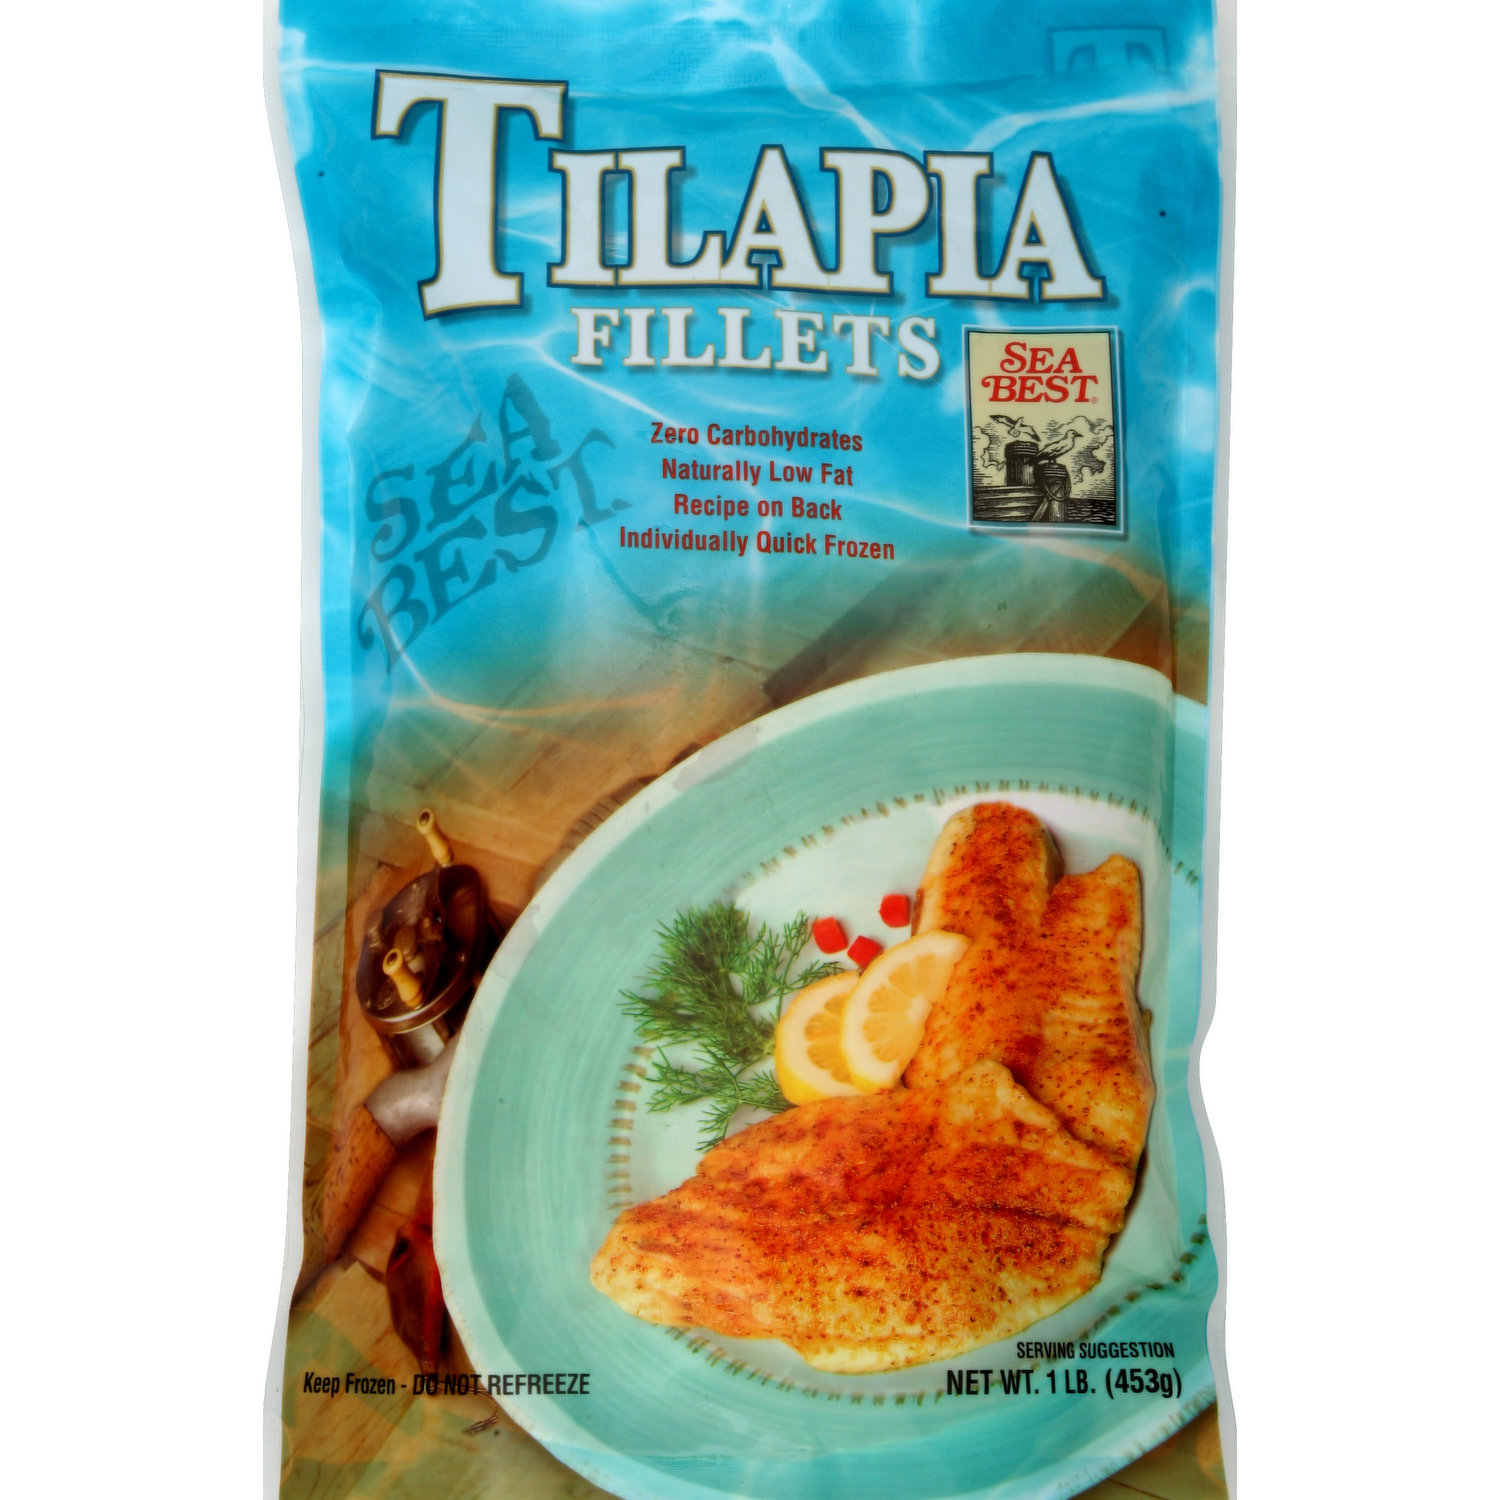 How to Clean Tilapia - AQUABEST SEAFOOD